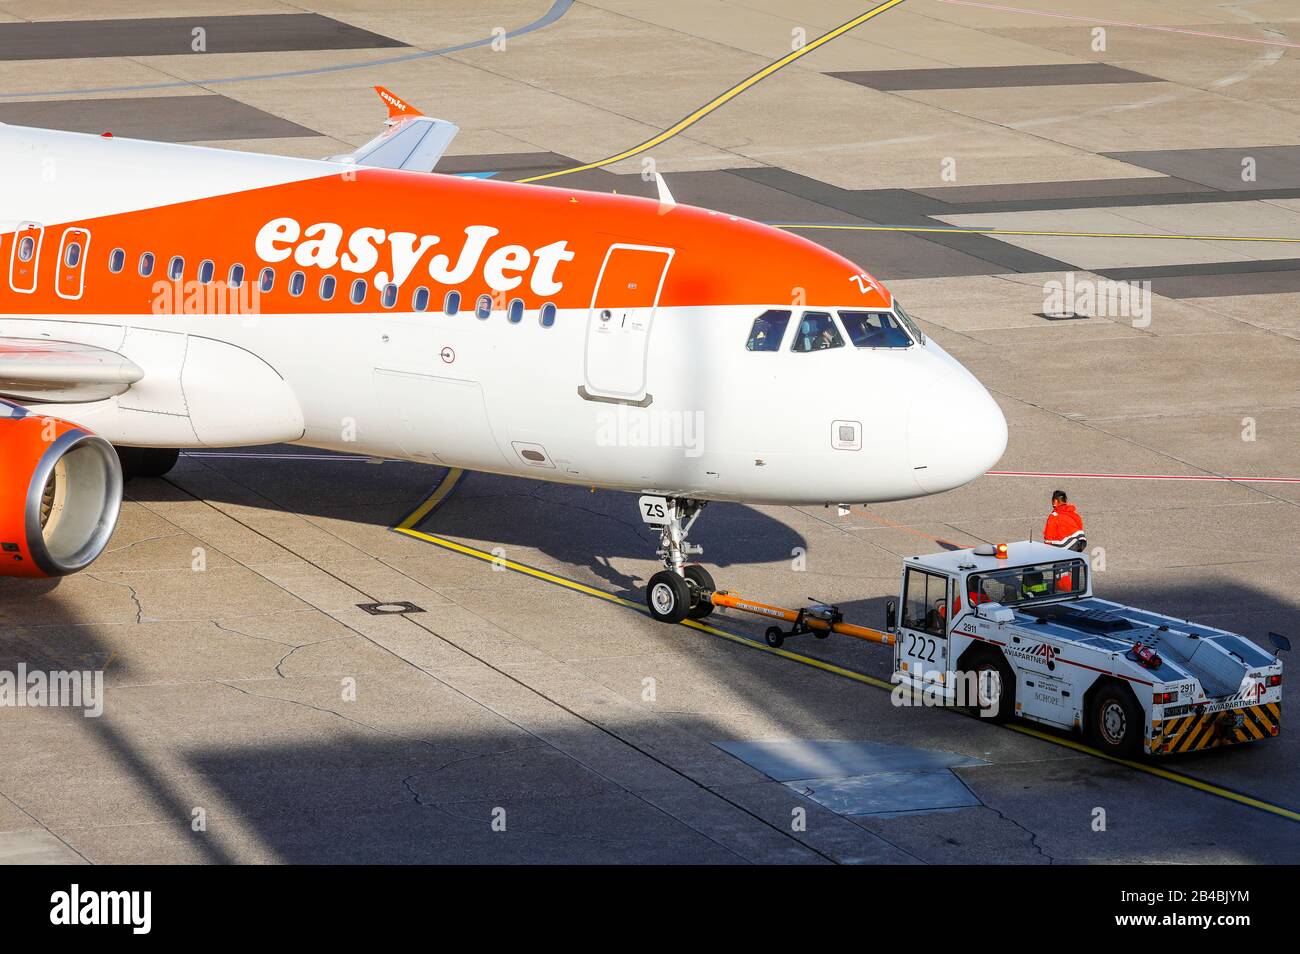 Duesseldorf, North Rhine-Westphalia, Germany - easyJet, Airbus A320-214 aircraft waiting for departure at Duesseldorf International Airport, OE-IZS. D Stock Photo